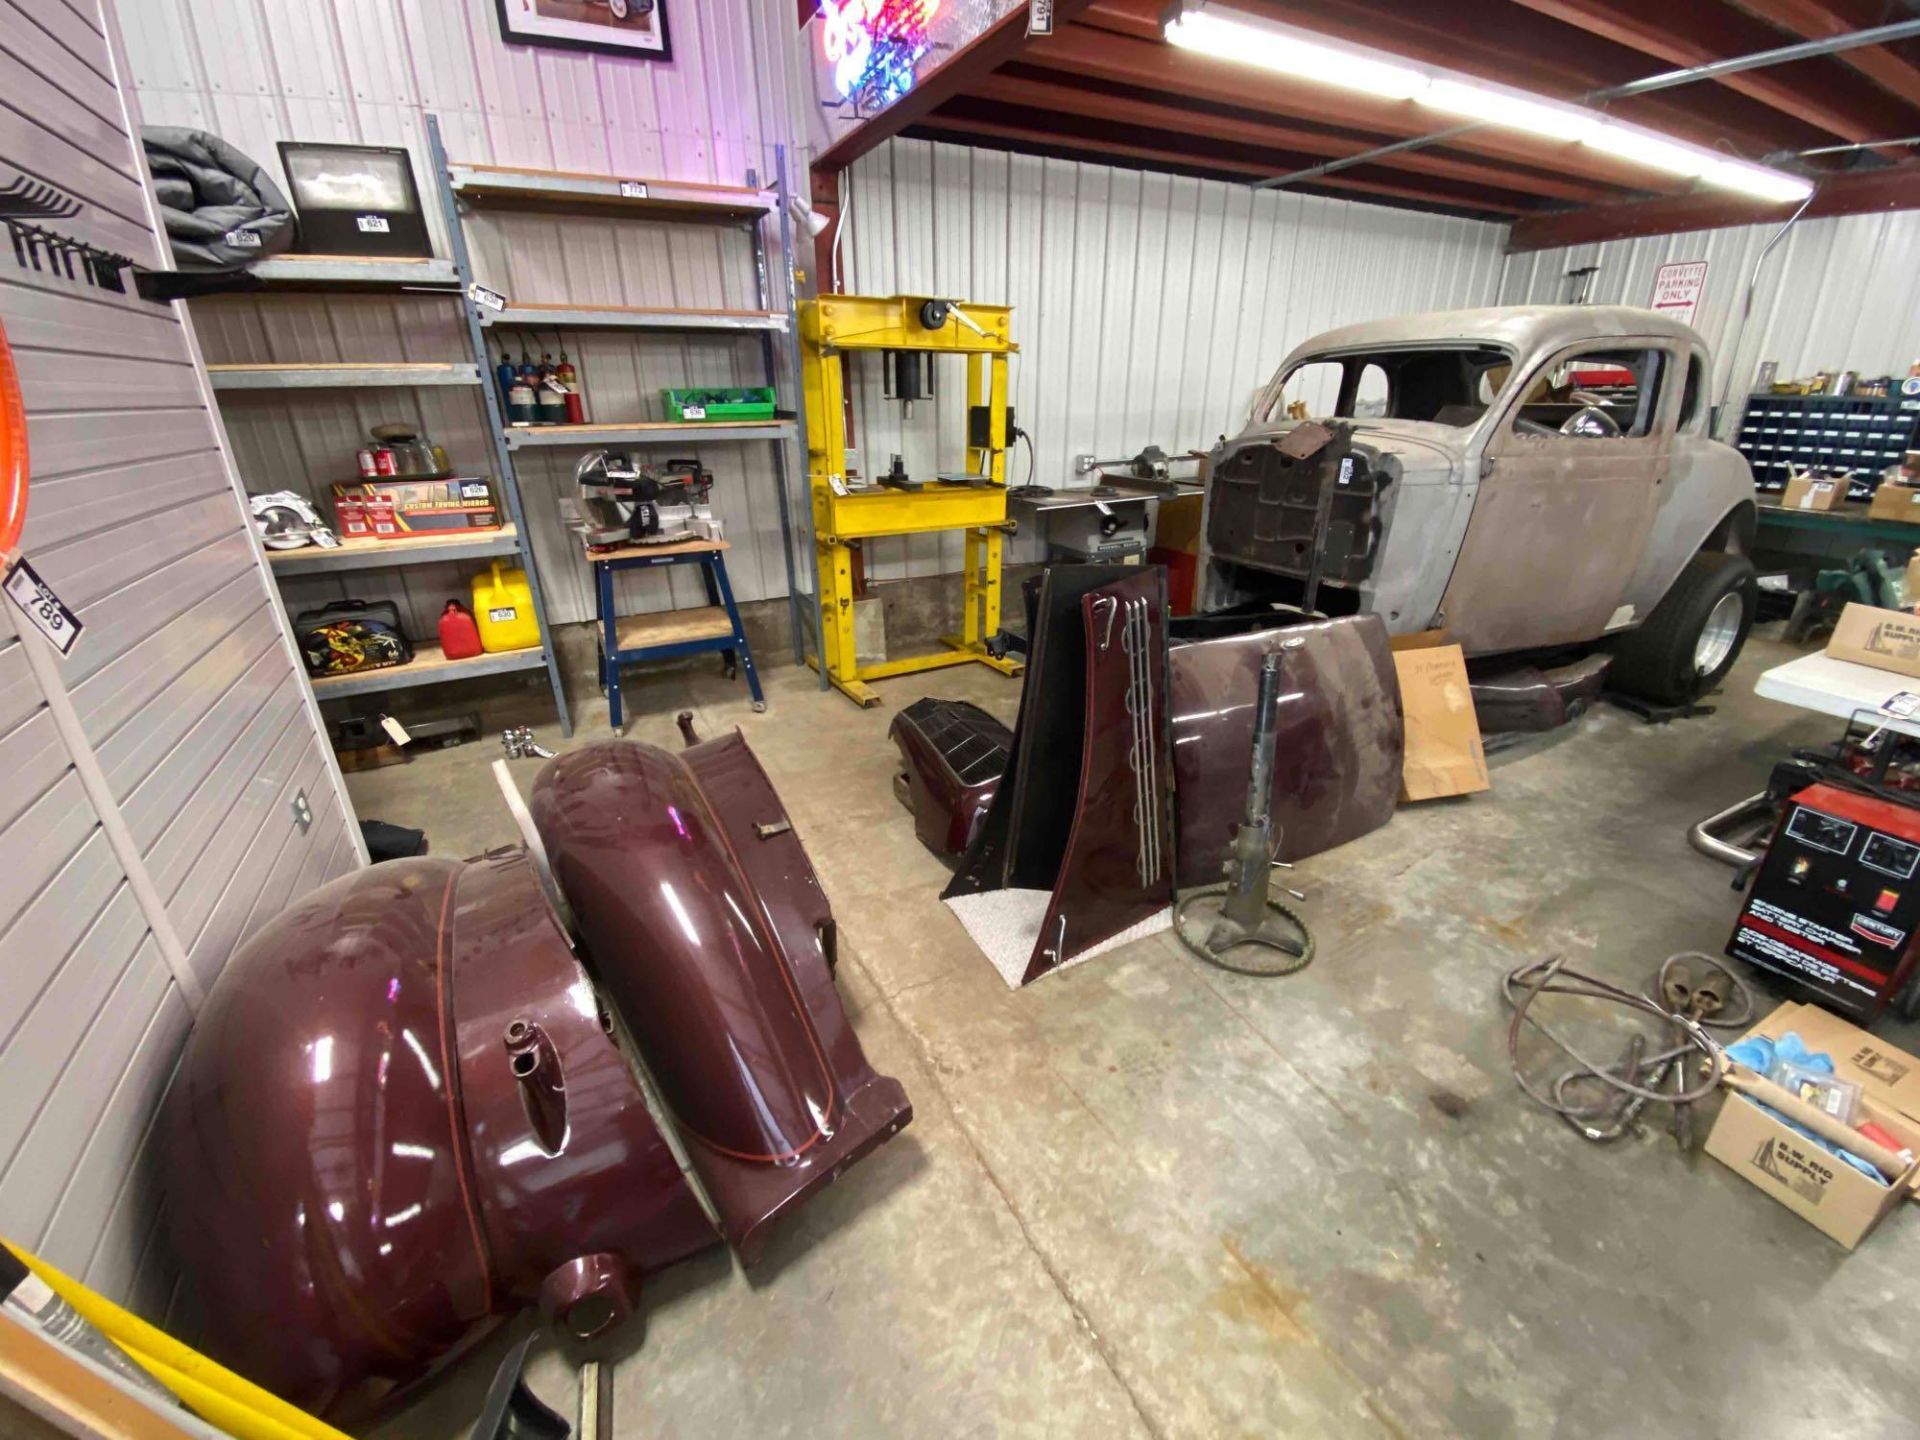 ’35 Plymouth Coupe Including Body Panels, Frame, Lights, etc. ***No Engine, Transmission, etc.***